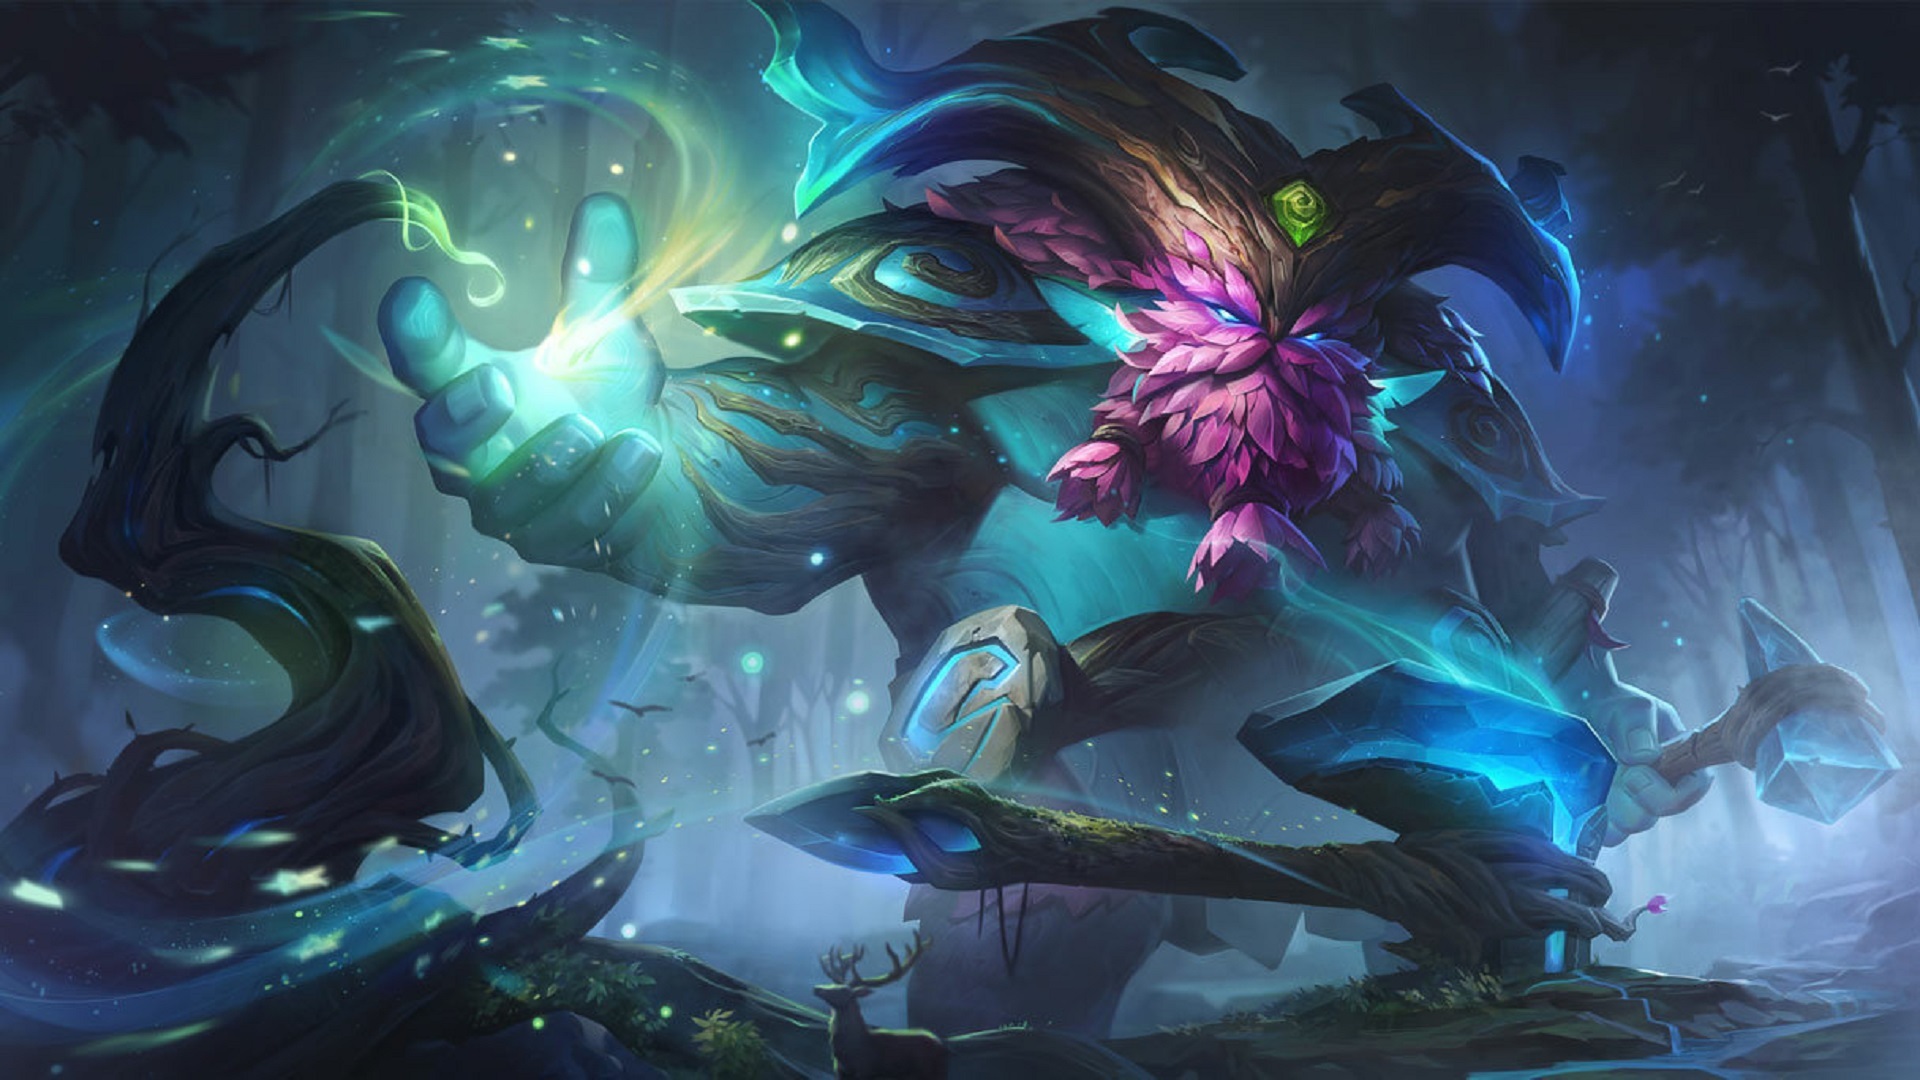 League of Legends MMO revealed early to combat leaks